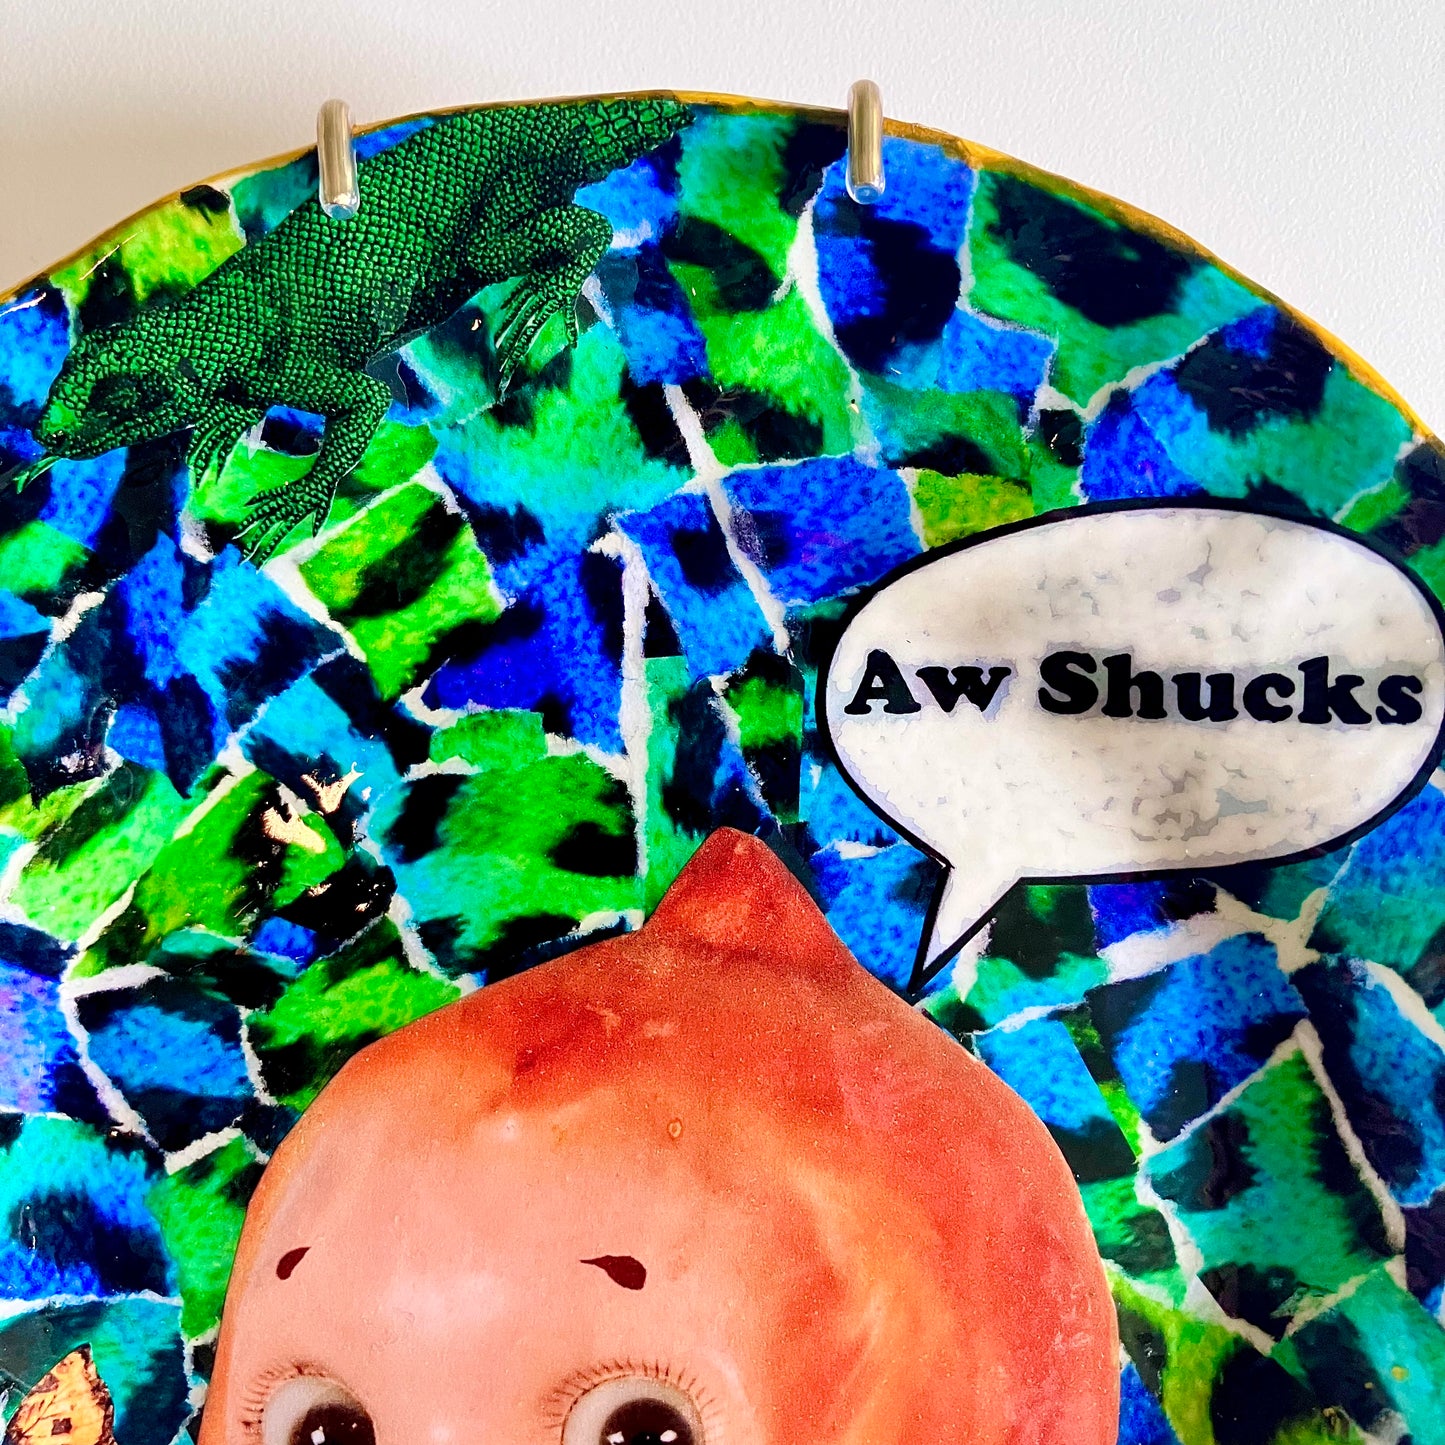 Blue Upcycled Wall Plate - “Aw Shucks” - by House of Frisson